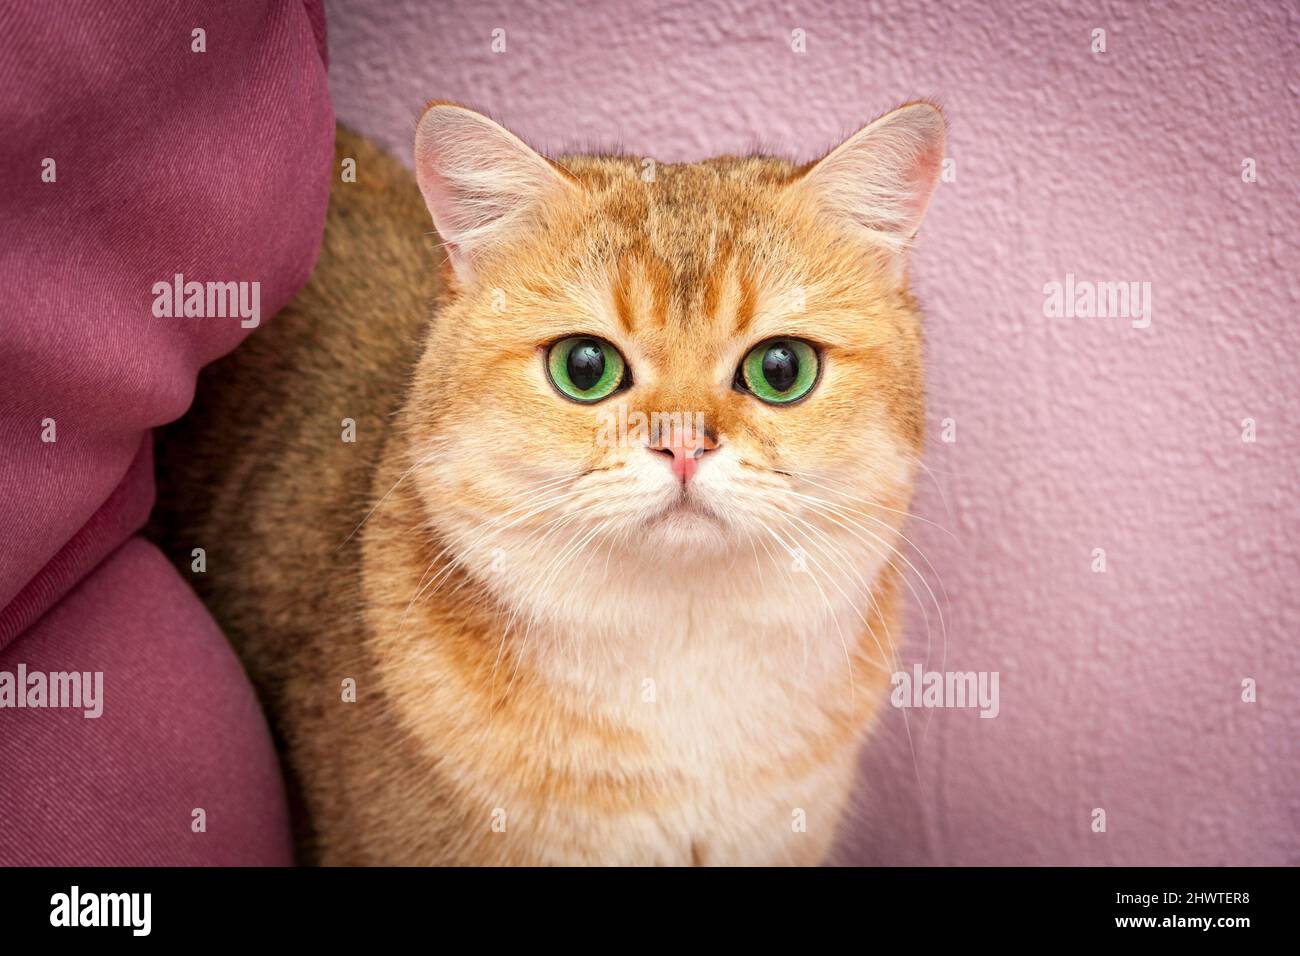 A gorgeous golden British cat with huge green eyes looks into the camera, a close-up portrait. Stock Photo